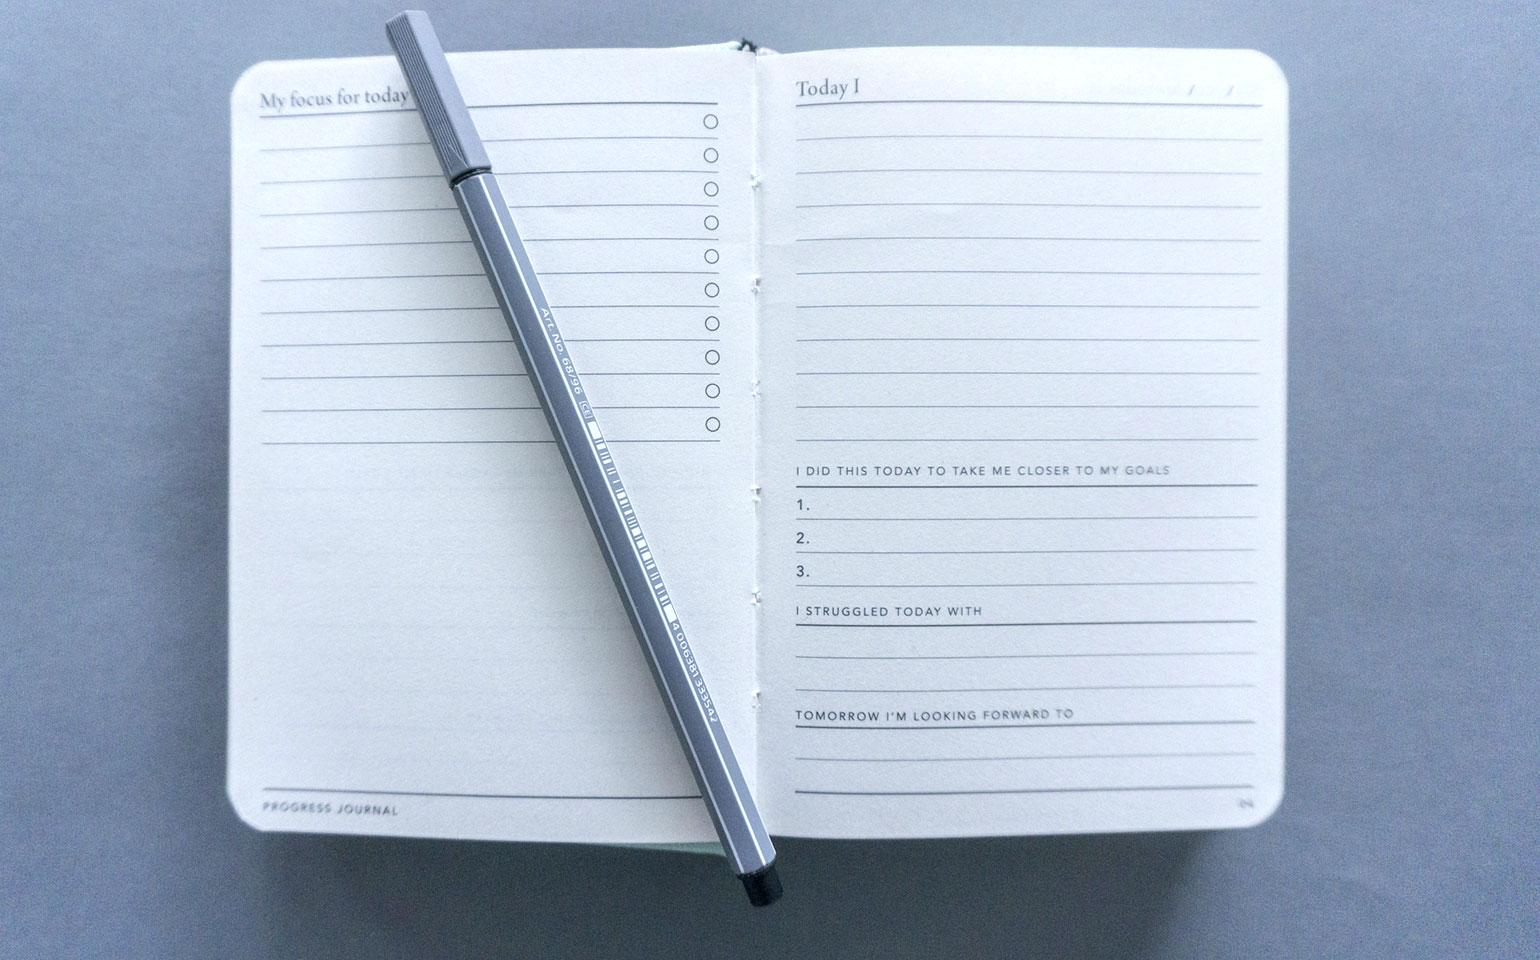 A journal is shown open to a blank page with a pen resting on top of it.